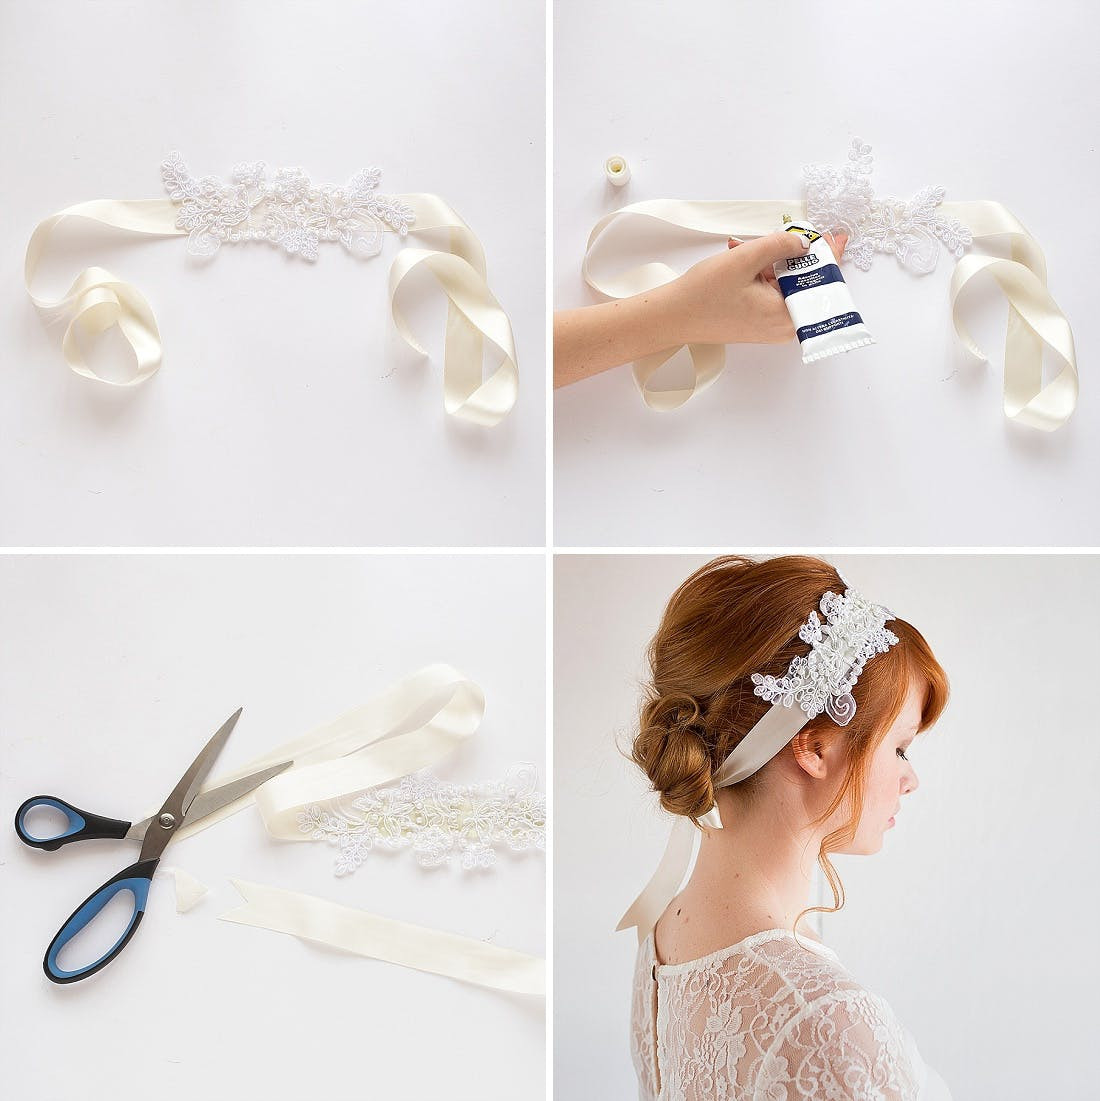 DIY Wedding Headpiece
 How to Make a Gorgeous Wedding Hair Accessory in Less Than